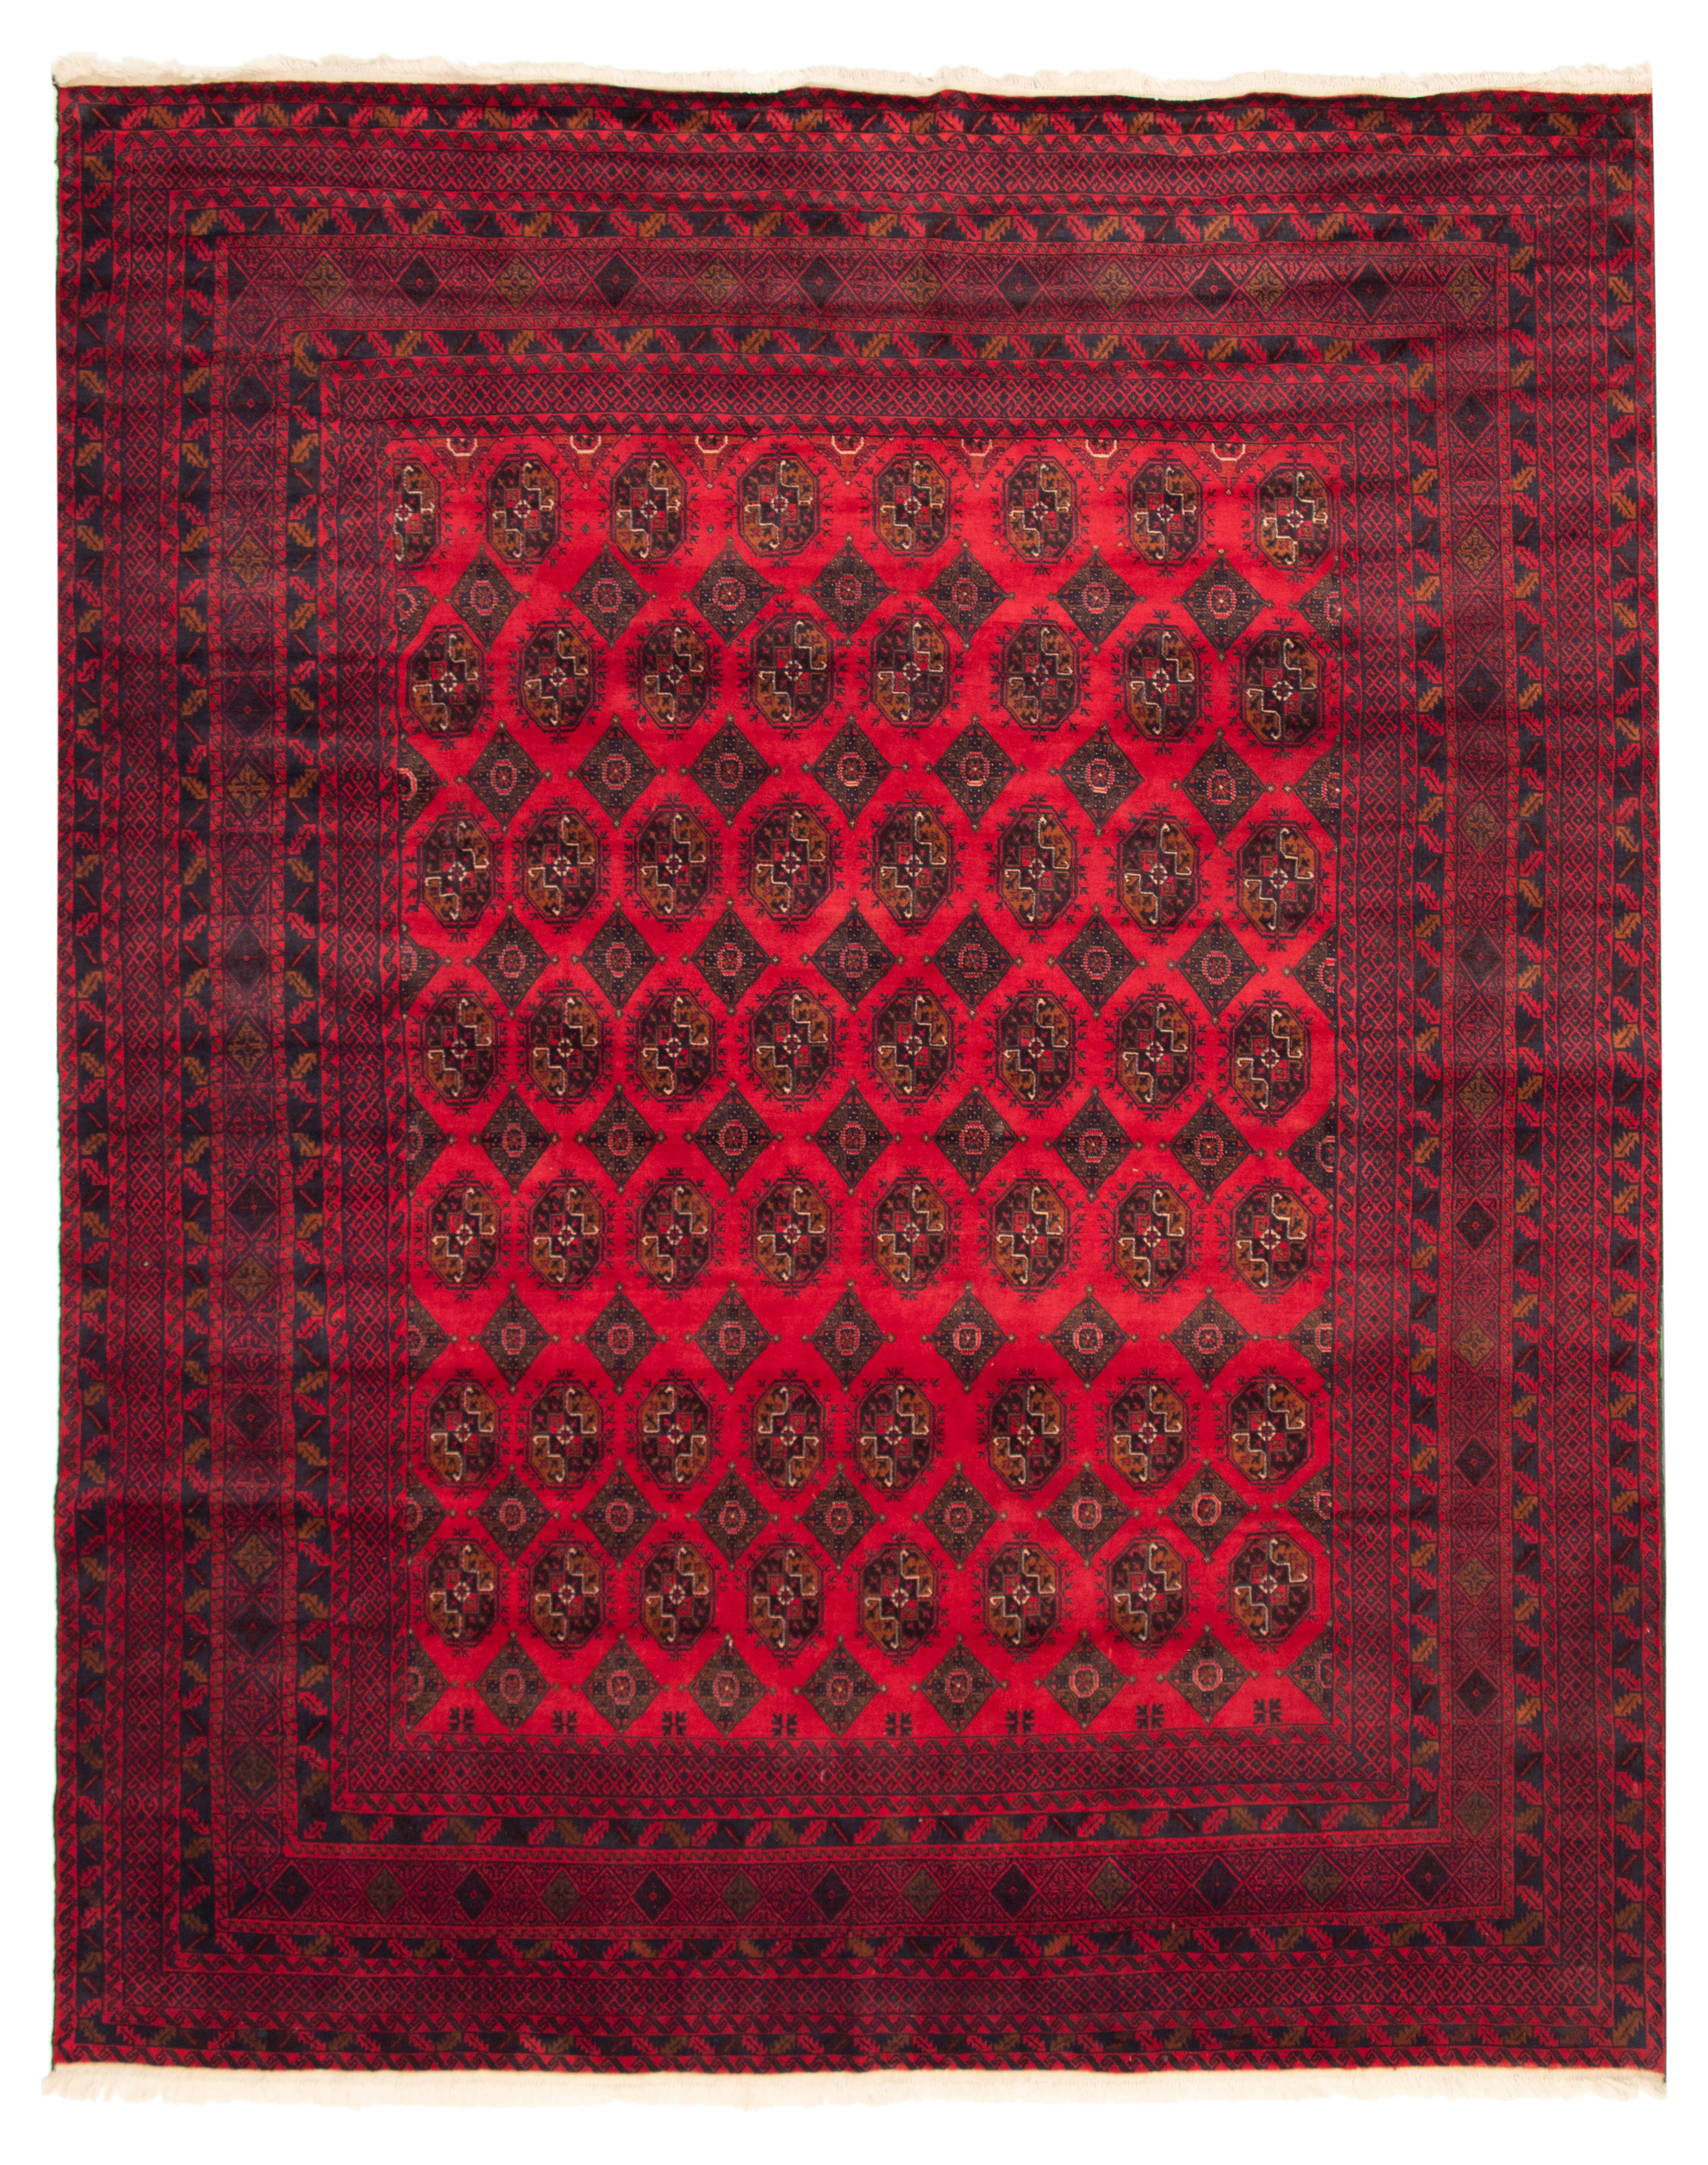 Hand-knotted Teimani Red Wool Rug 9'10" x 12'4" Size: 9'10" x 12'4"  